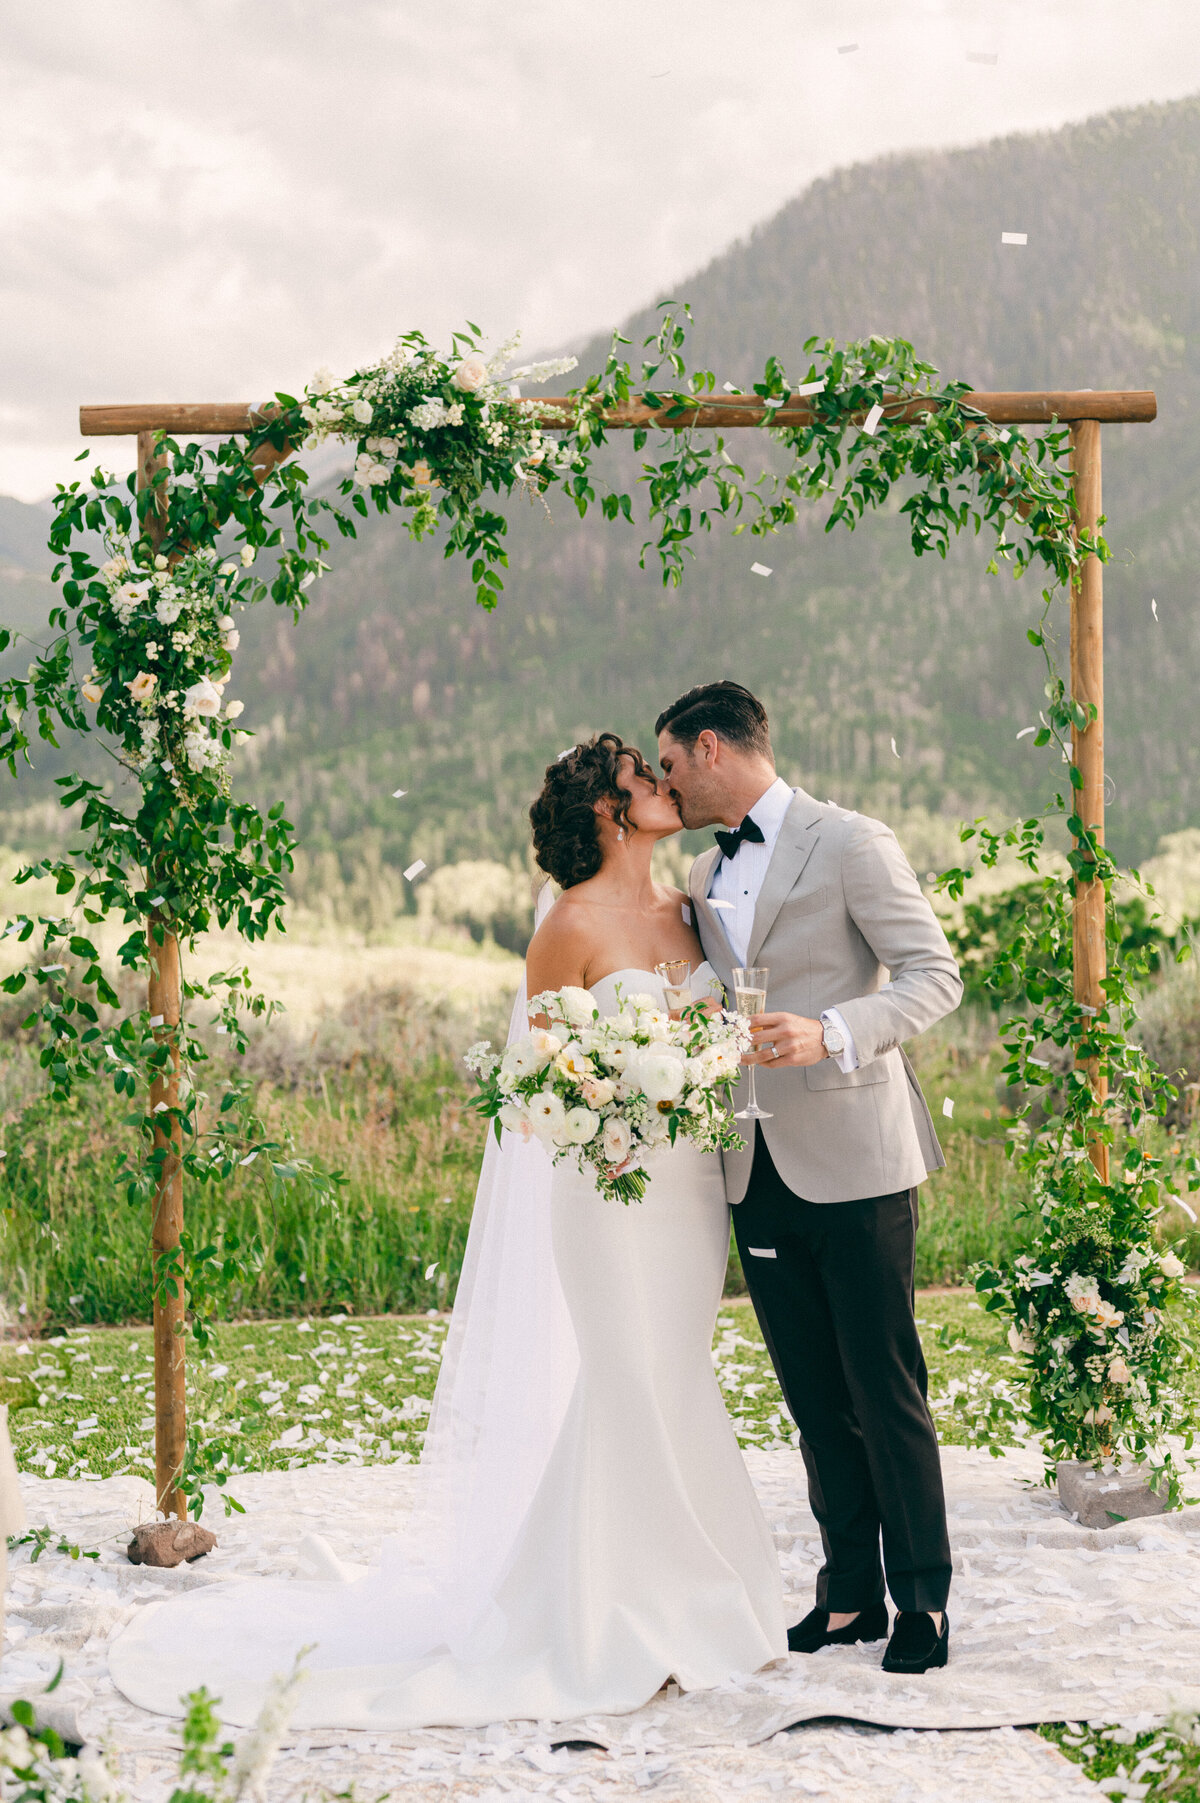 Lia-Ross-Aspen-Snowmass-Patak-Ranch-Wedding-Photography-By-Jacie-Marguerite-442